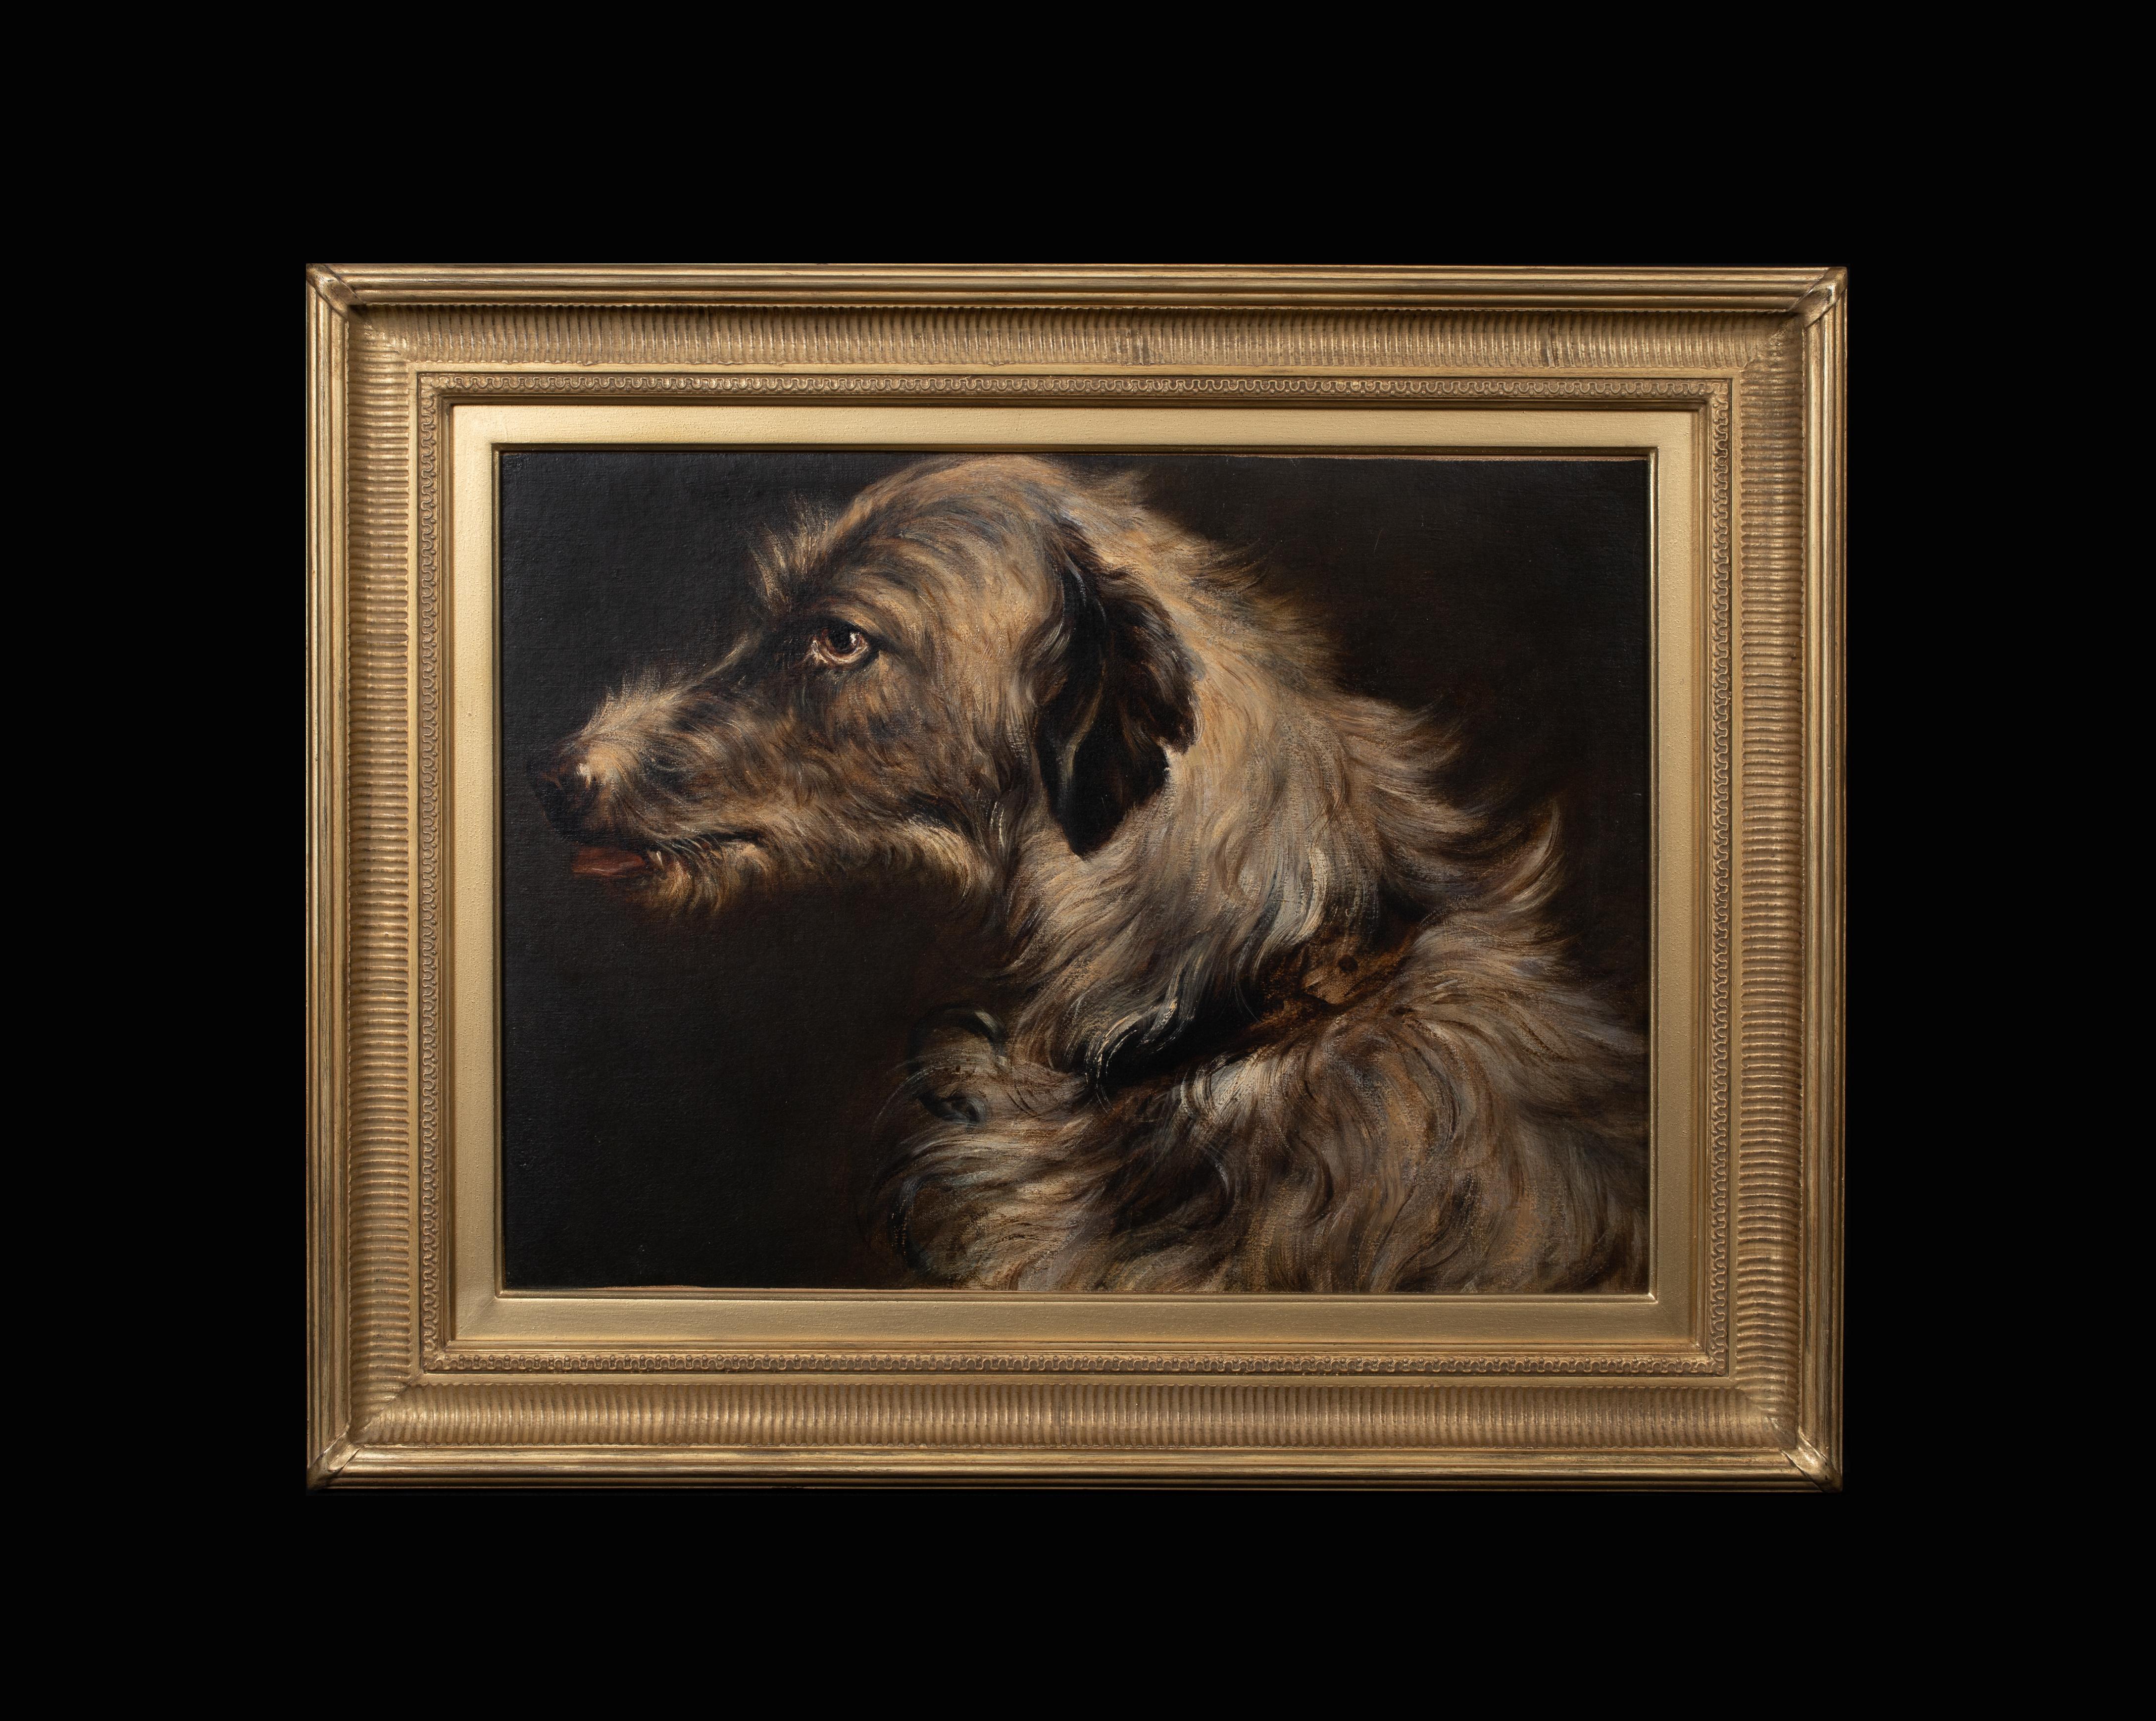 Portrait of An Irish Wolfhound, 19th century - Painting by Sir Edwin Landseer